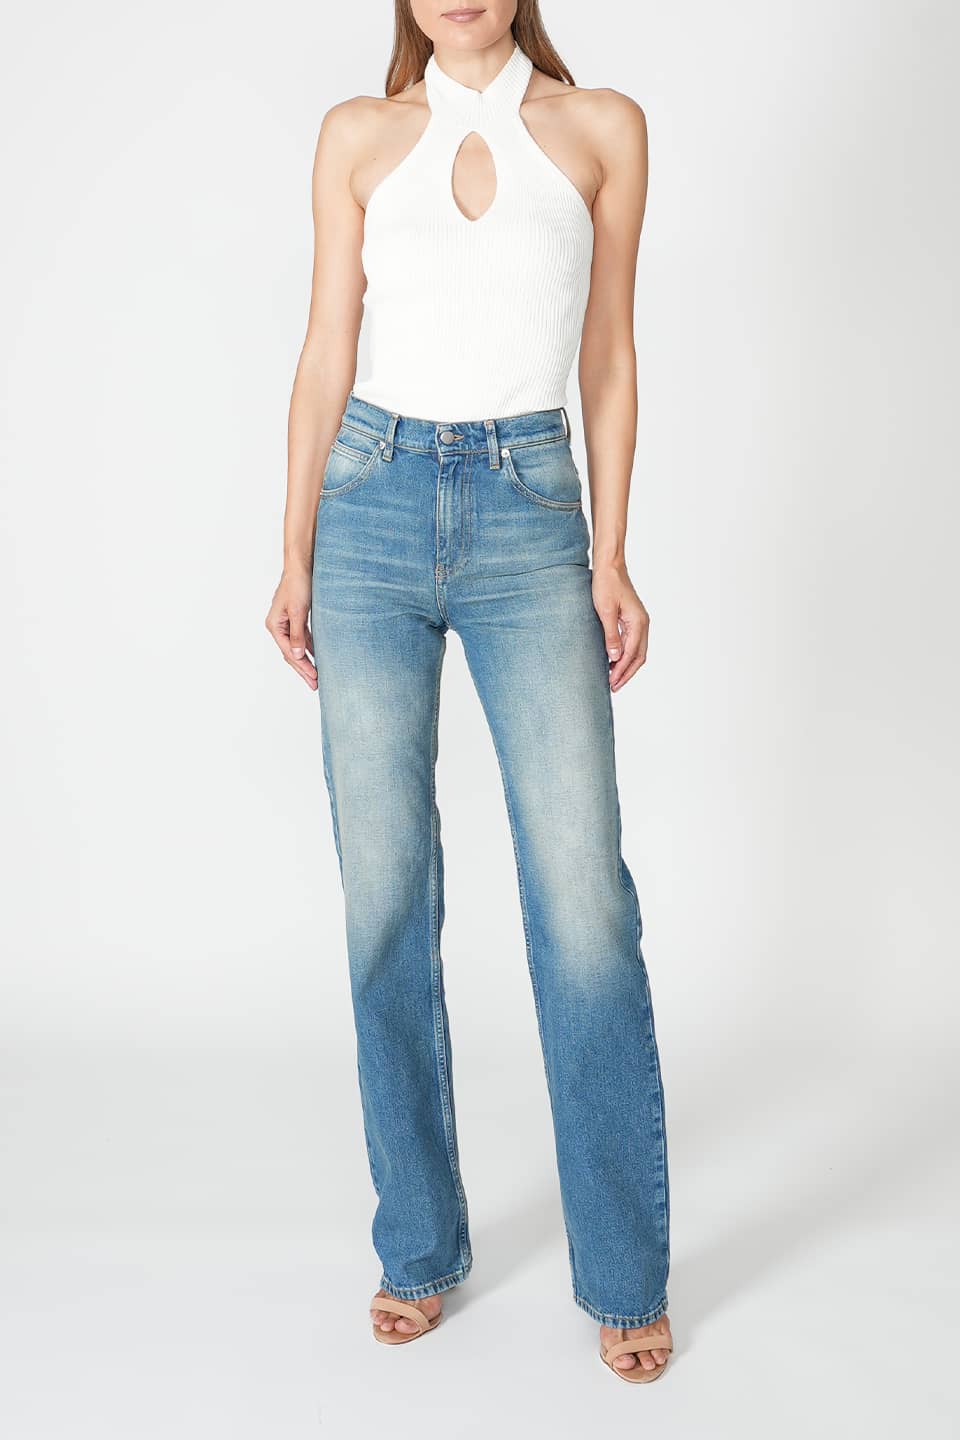 Designer Indigo Jeans, shop online with free delivery in UAE. Product gallery 2